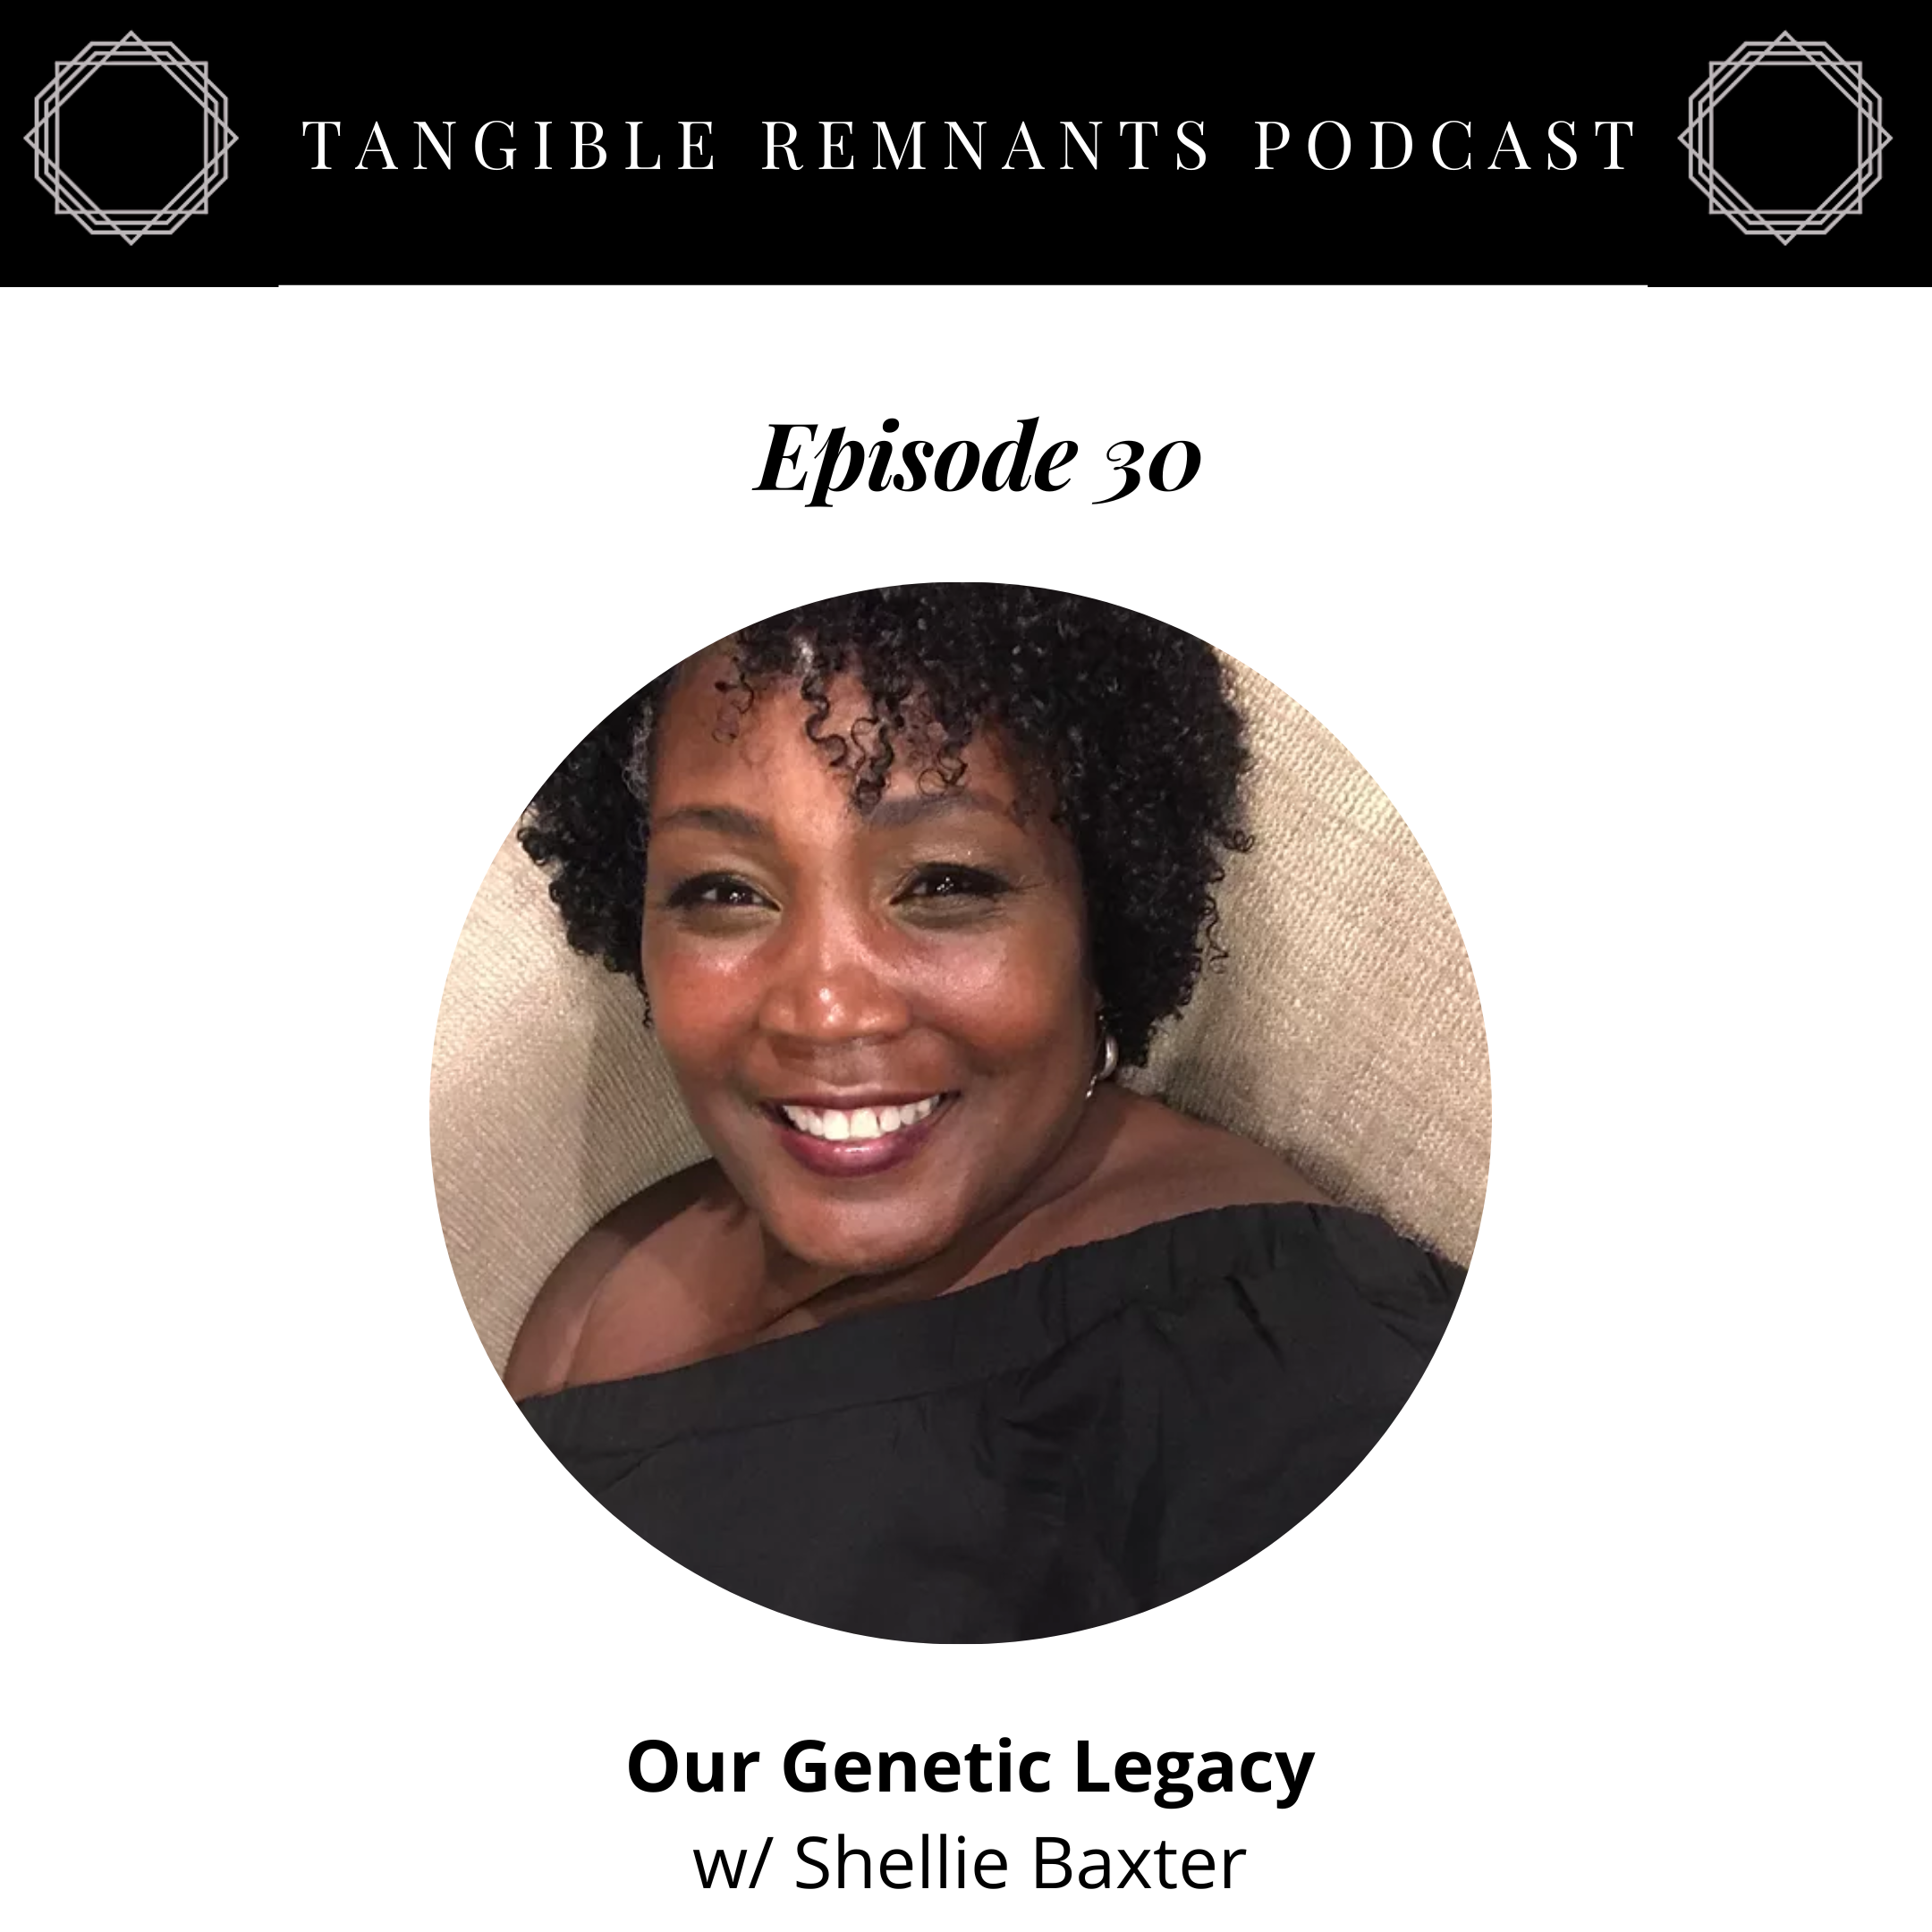 Our Genetic Legacy w/ Shellie Baxter